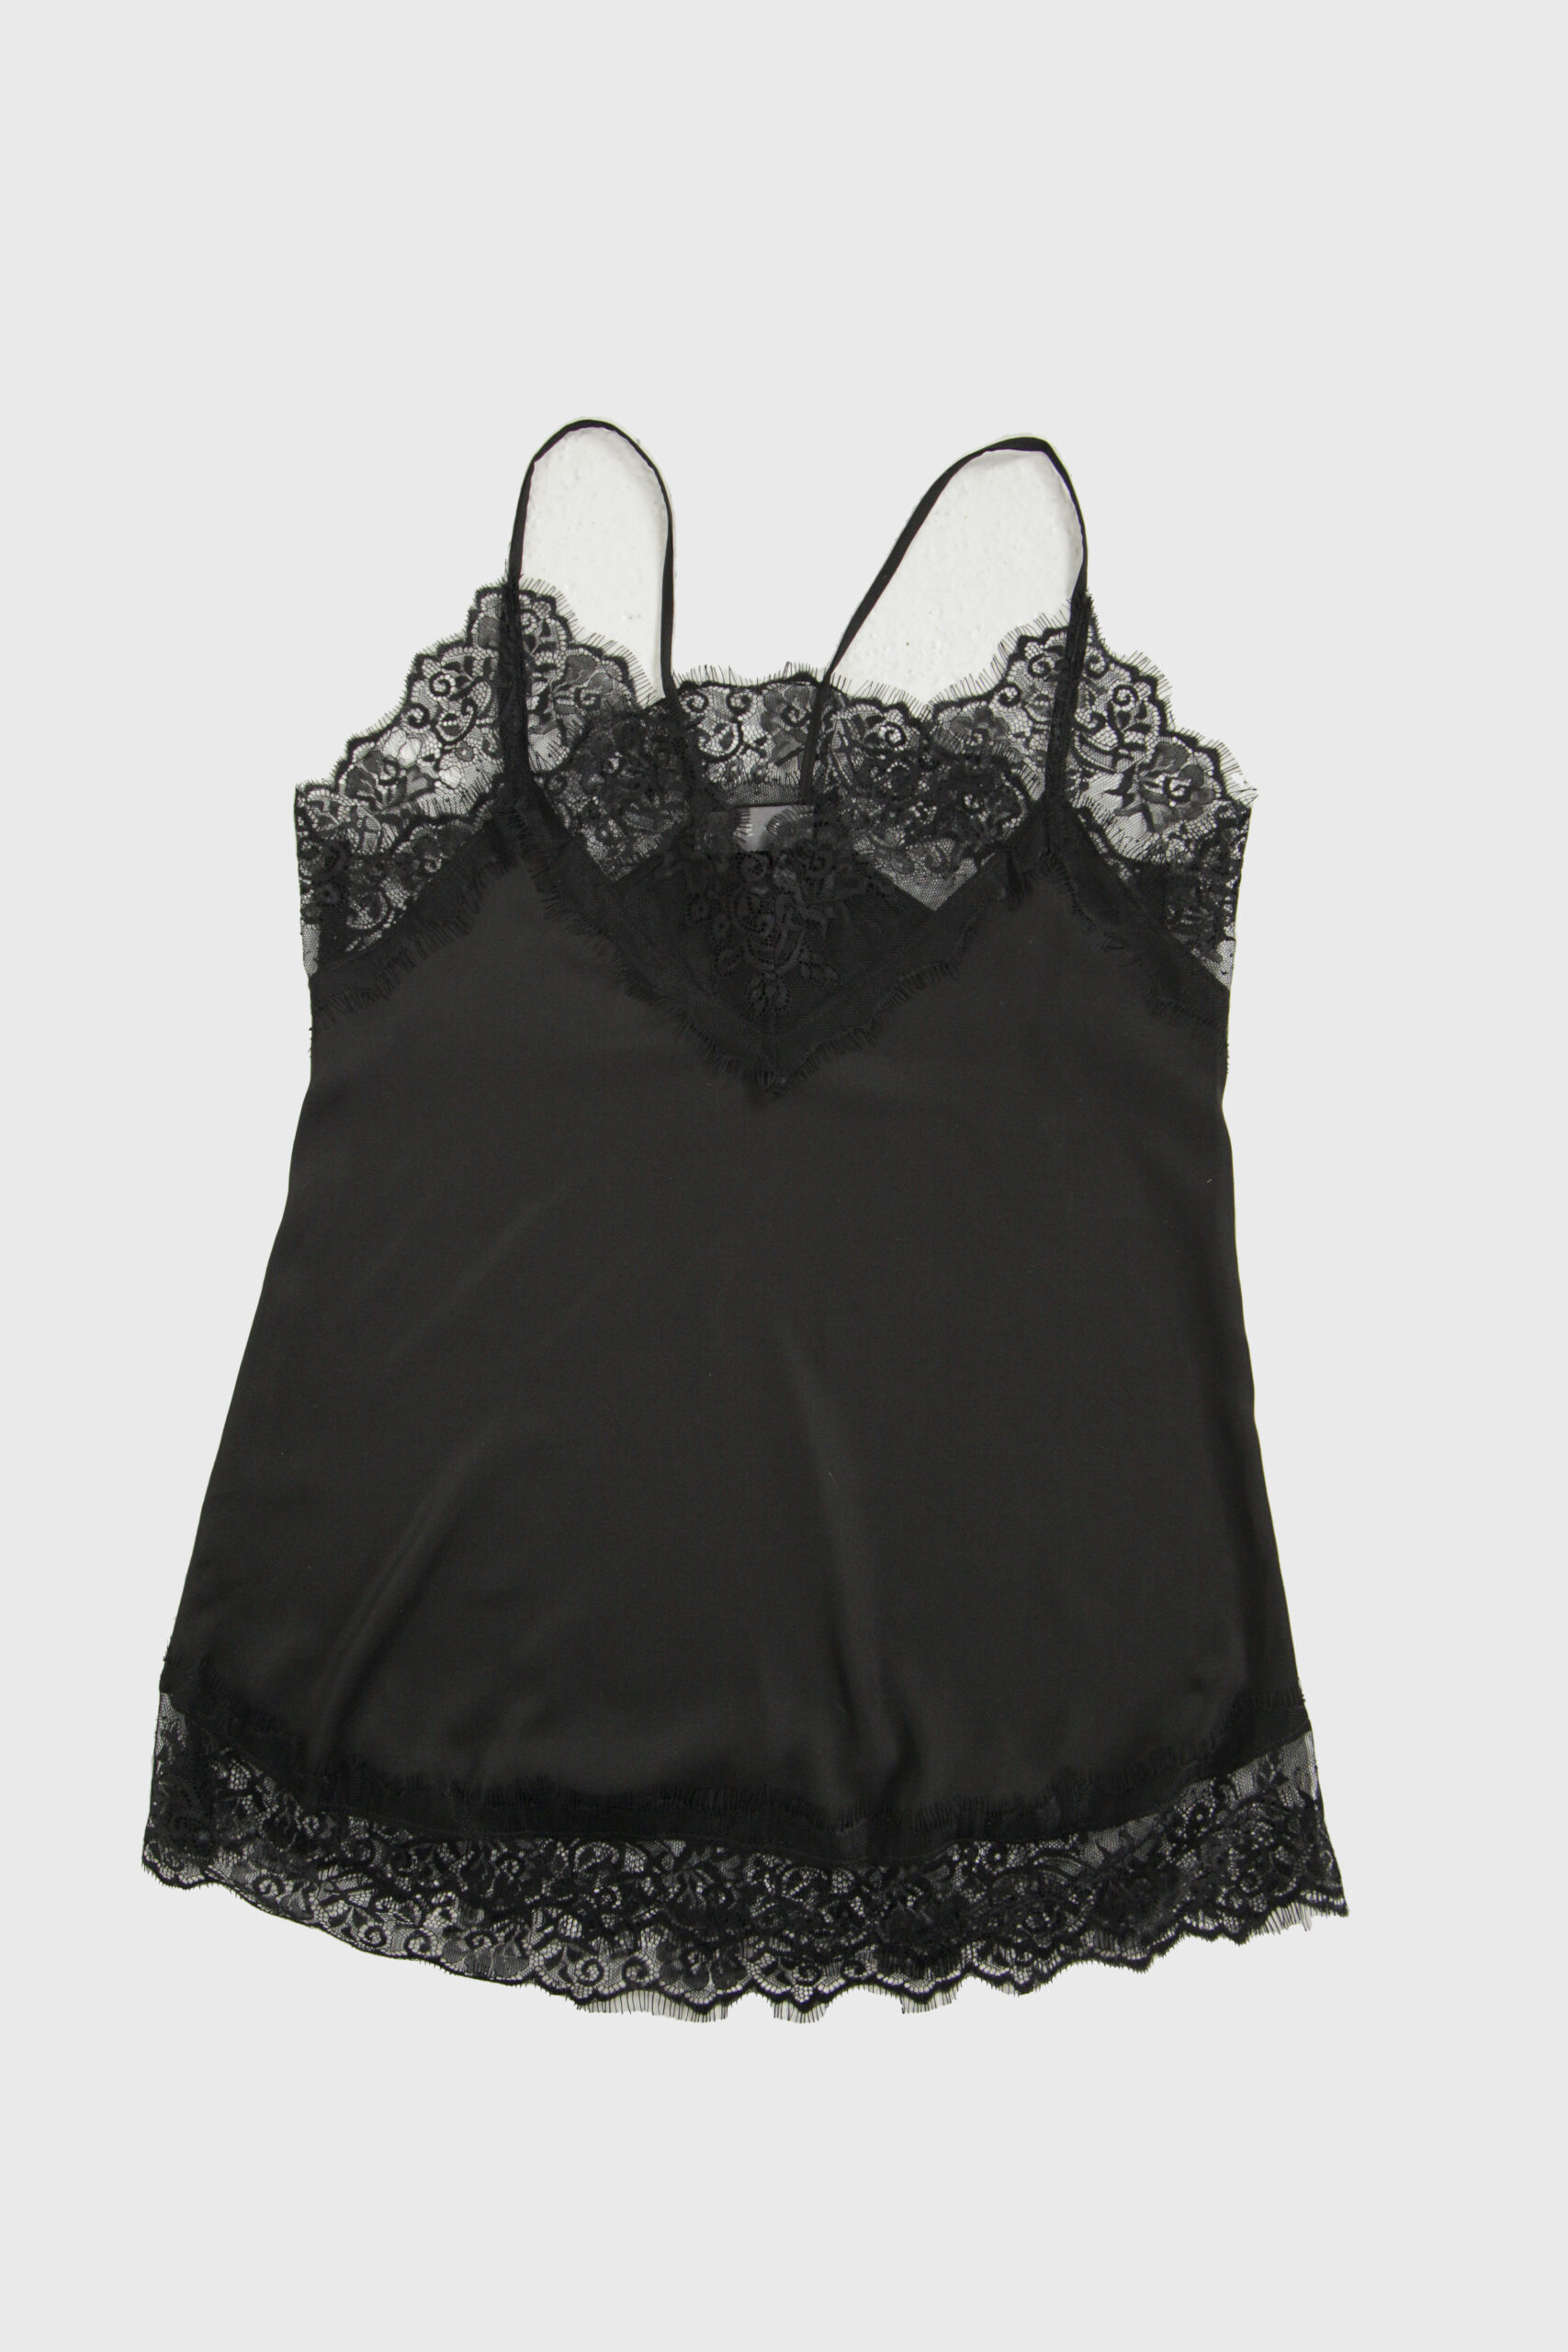 Elegant blouse with delicate lace